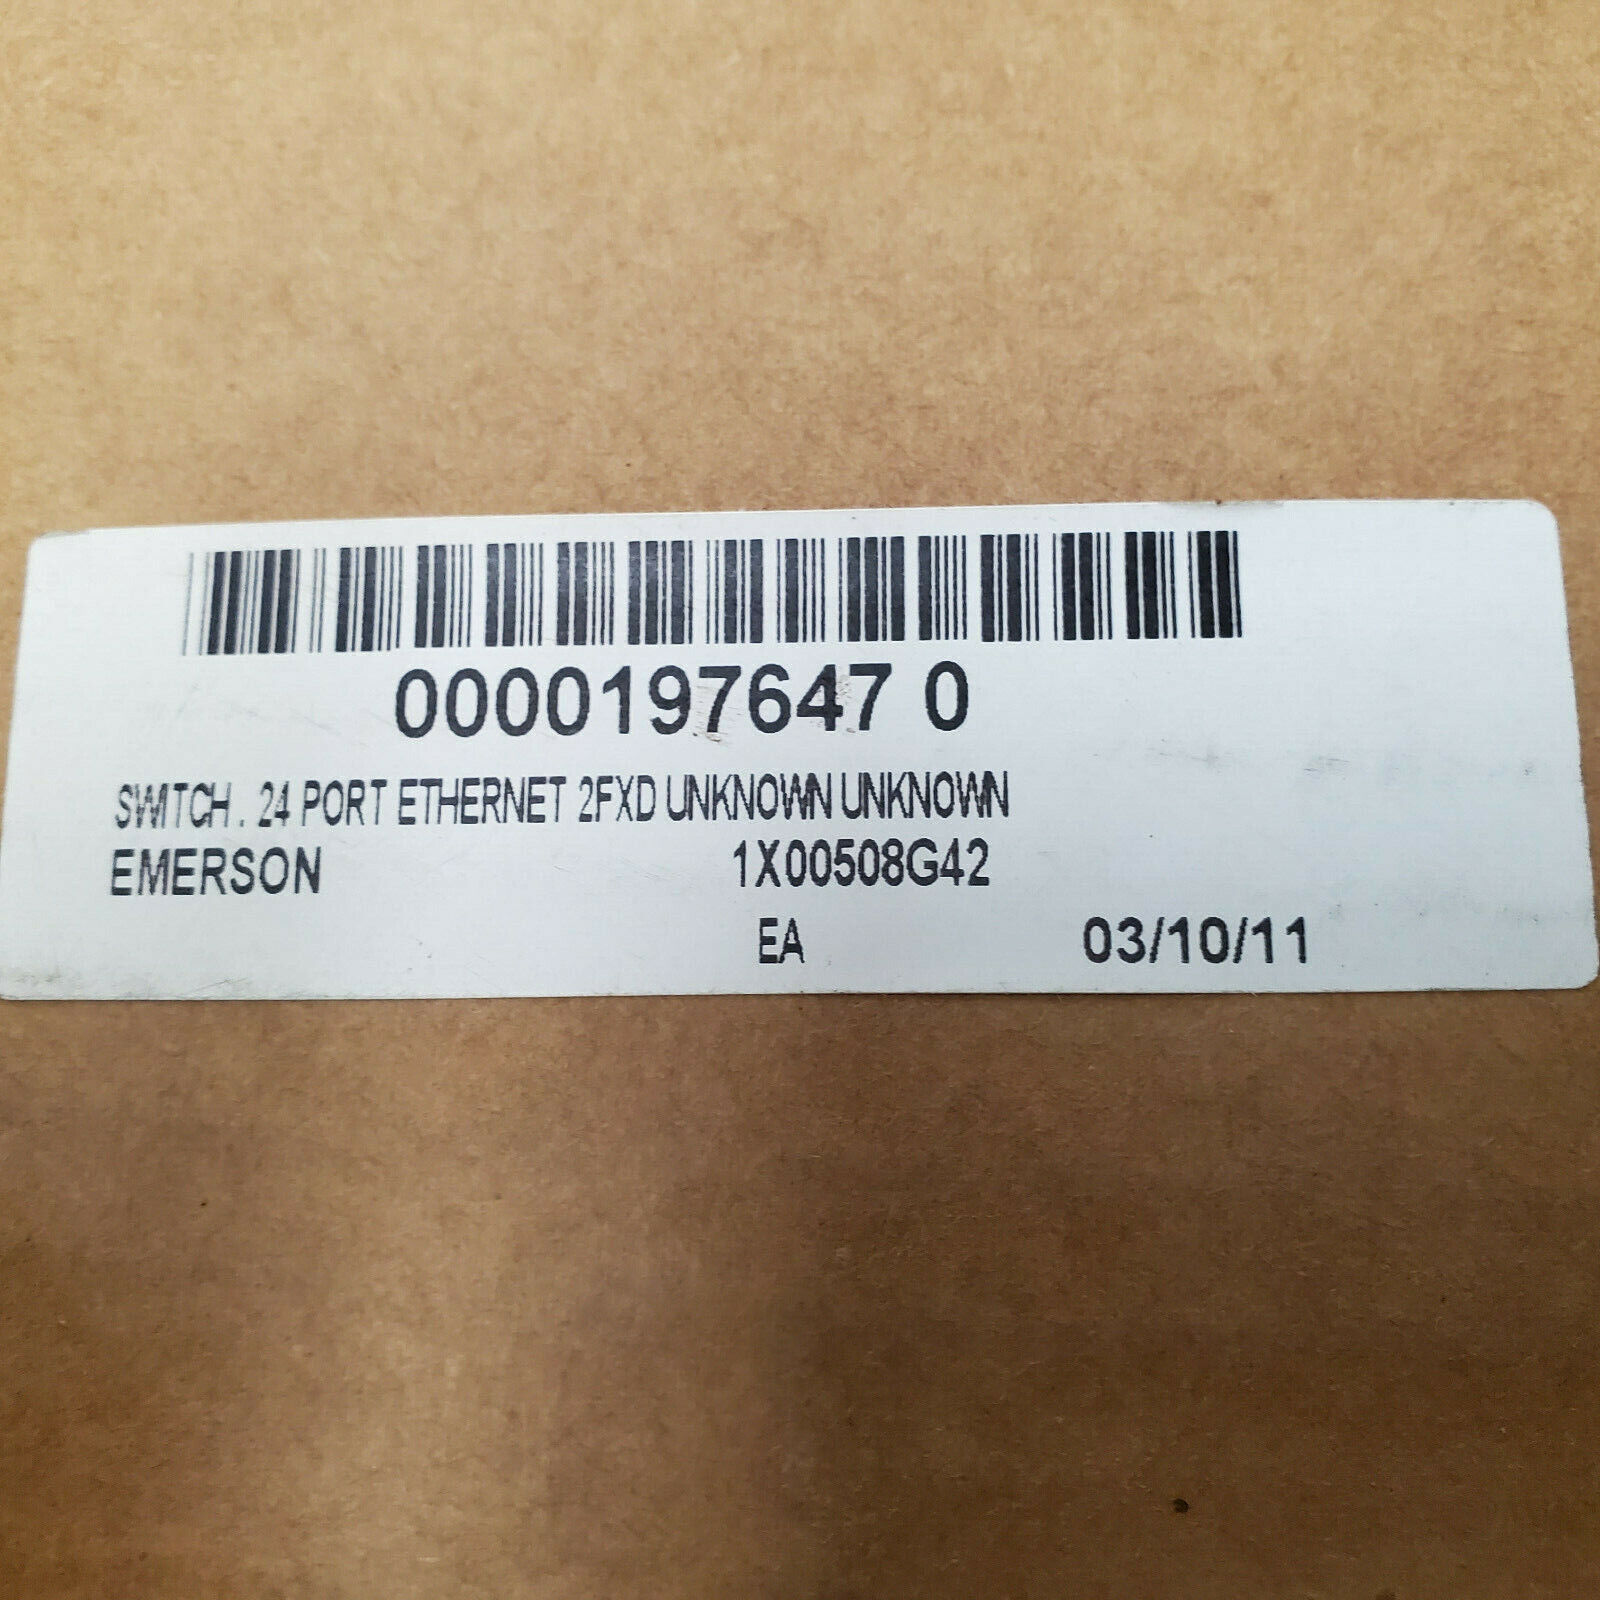  NEW Cisco-  EMERSON 24 PORT ETHERNET 2FXD SWITCH NUMBER 1X00508G42 